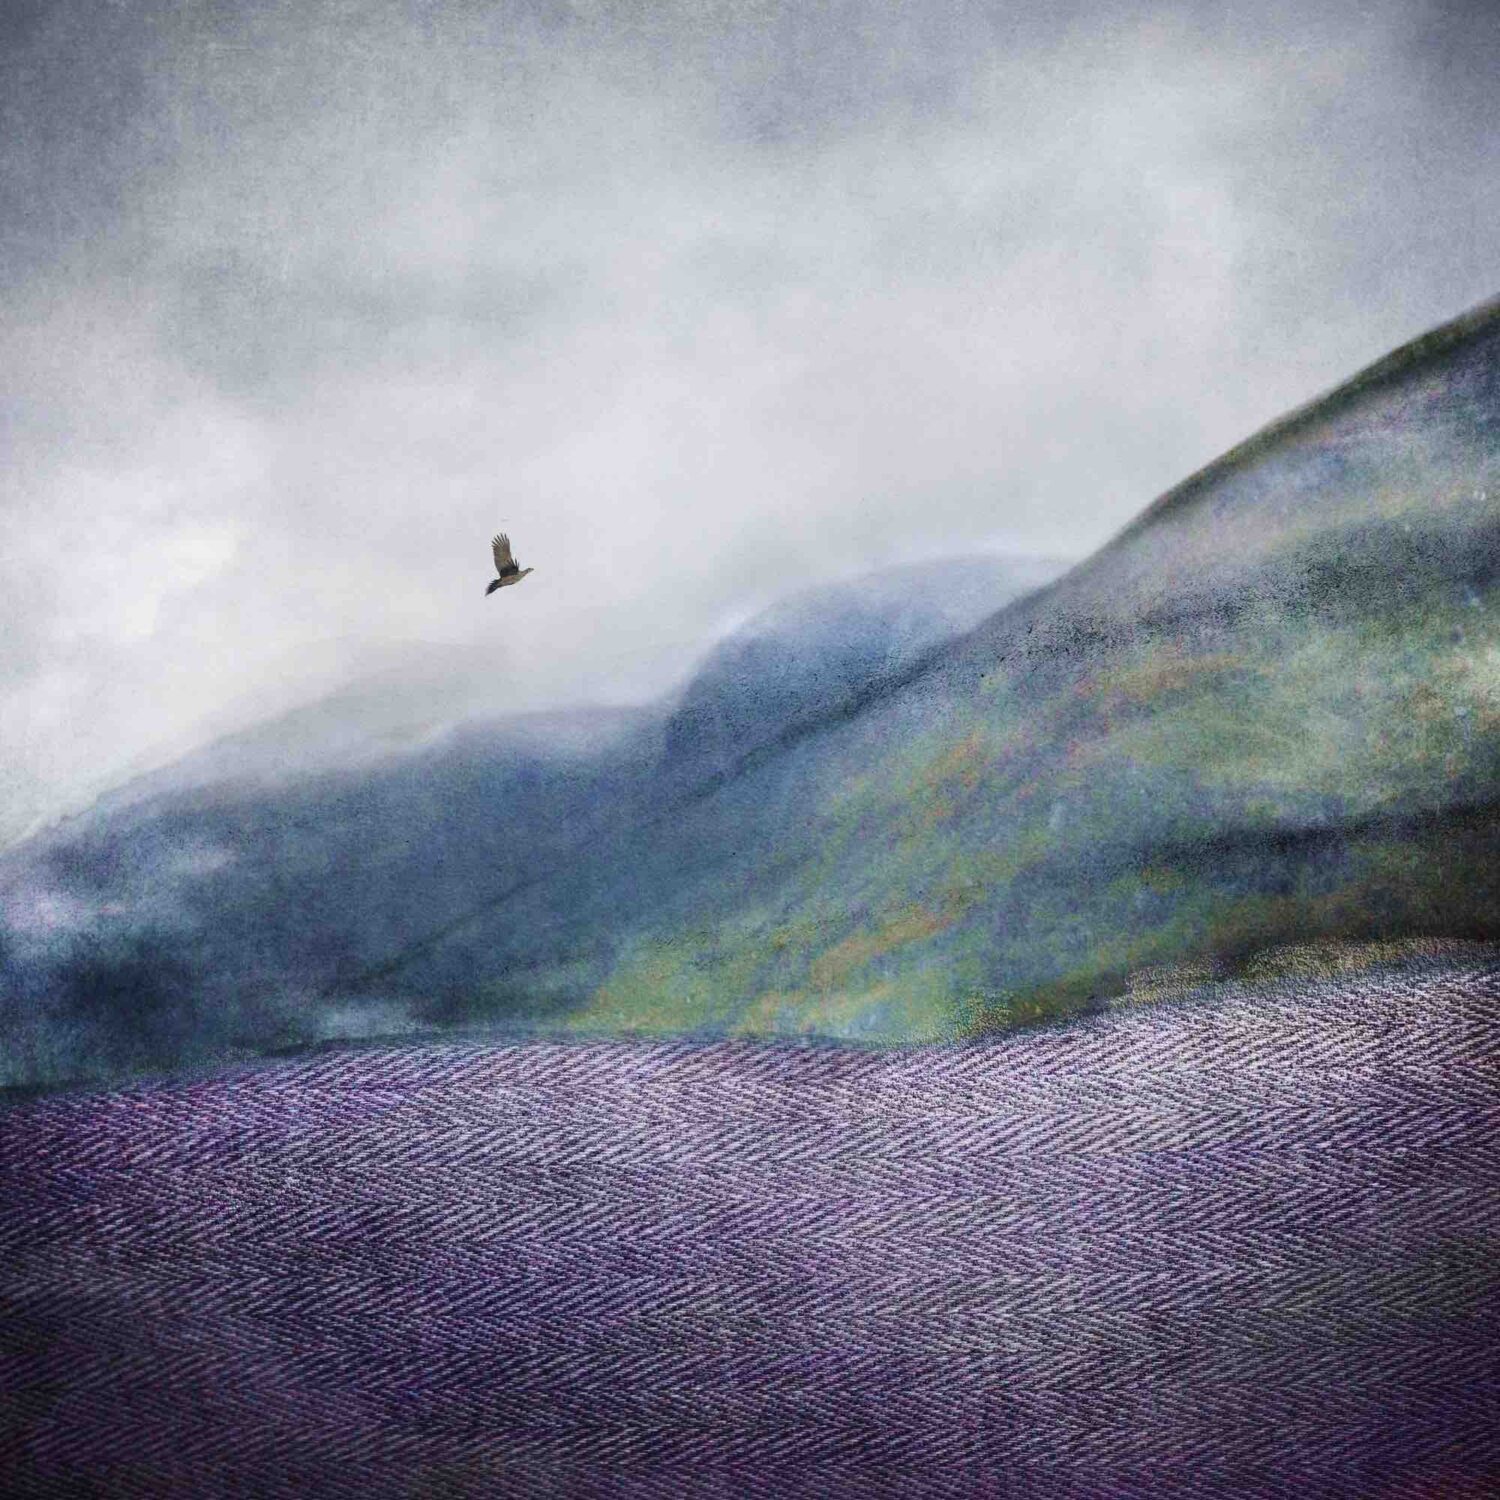 a Hills of Tweed art print close up. The print is an abstract picture of a Scottish hillside with a bird flying above in the distance. There is a tweed texture in the foreground.